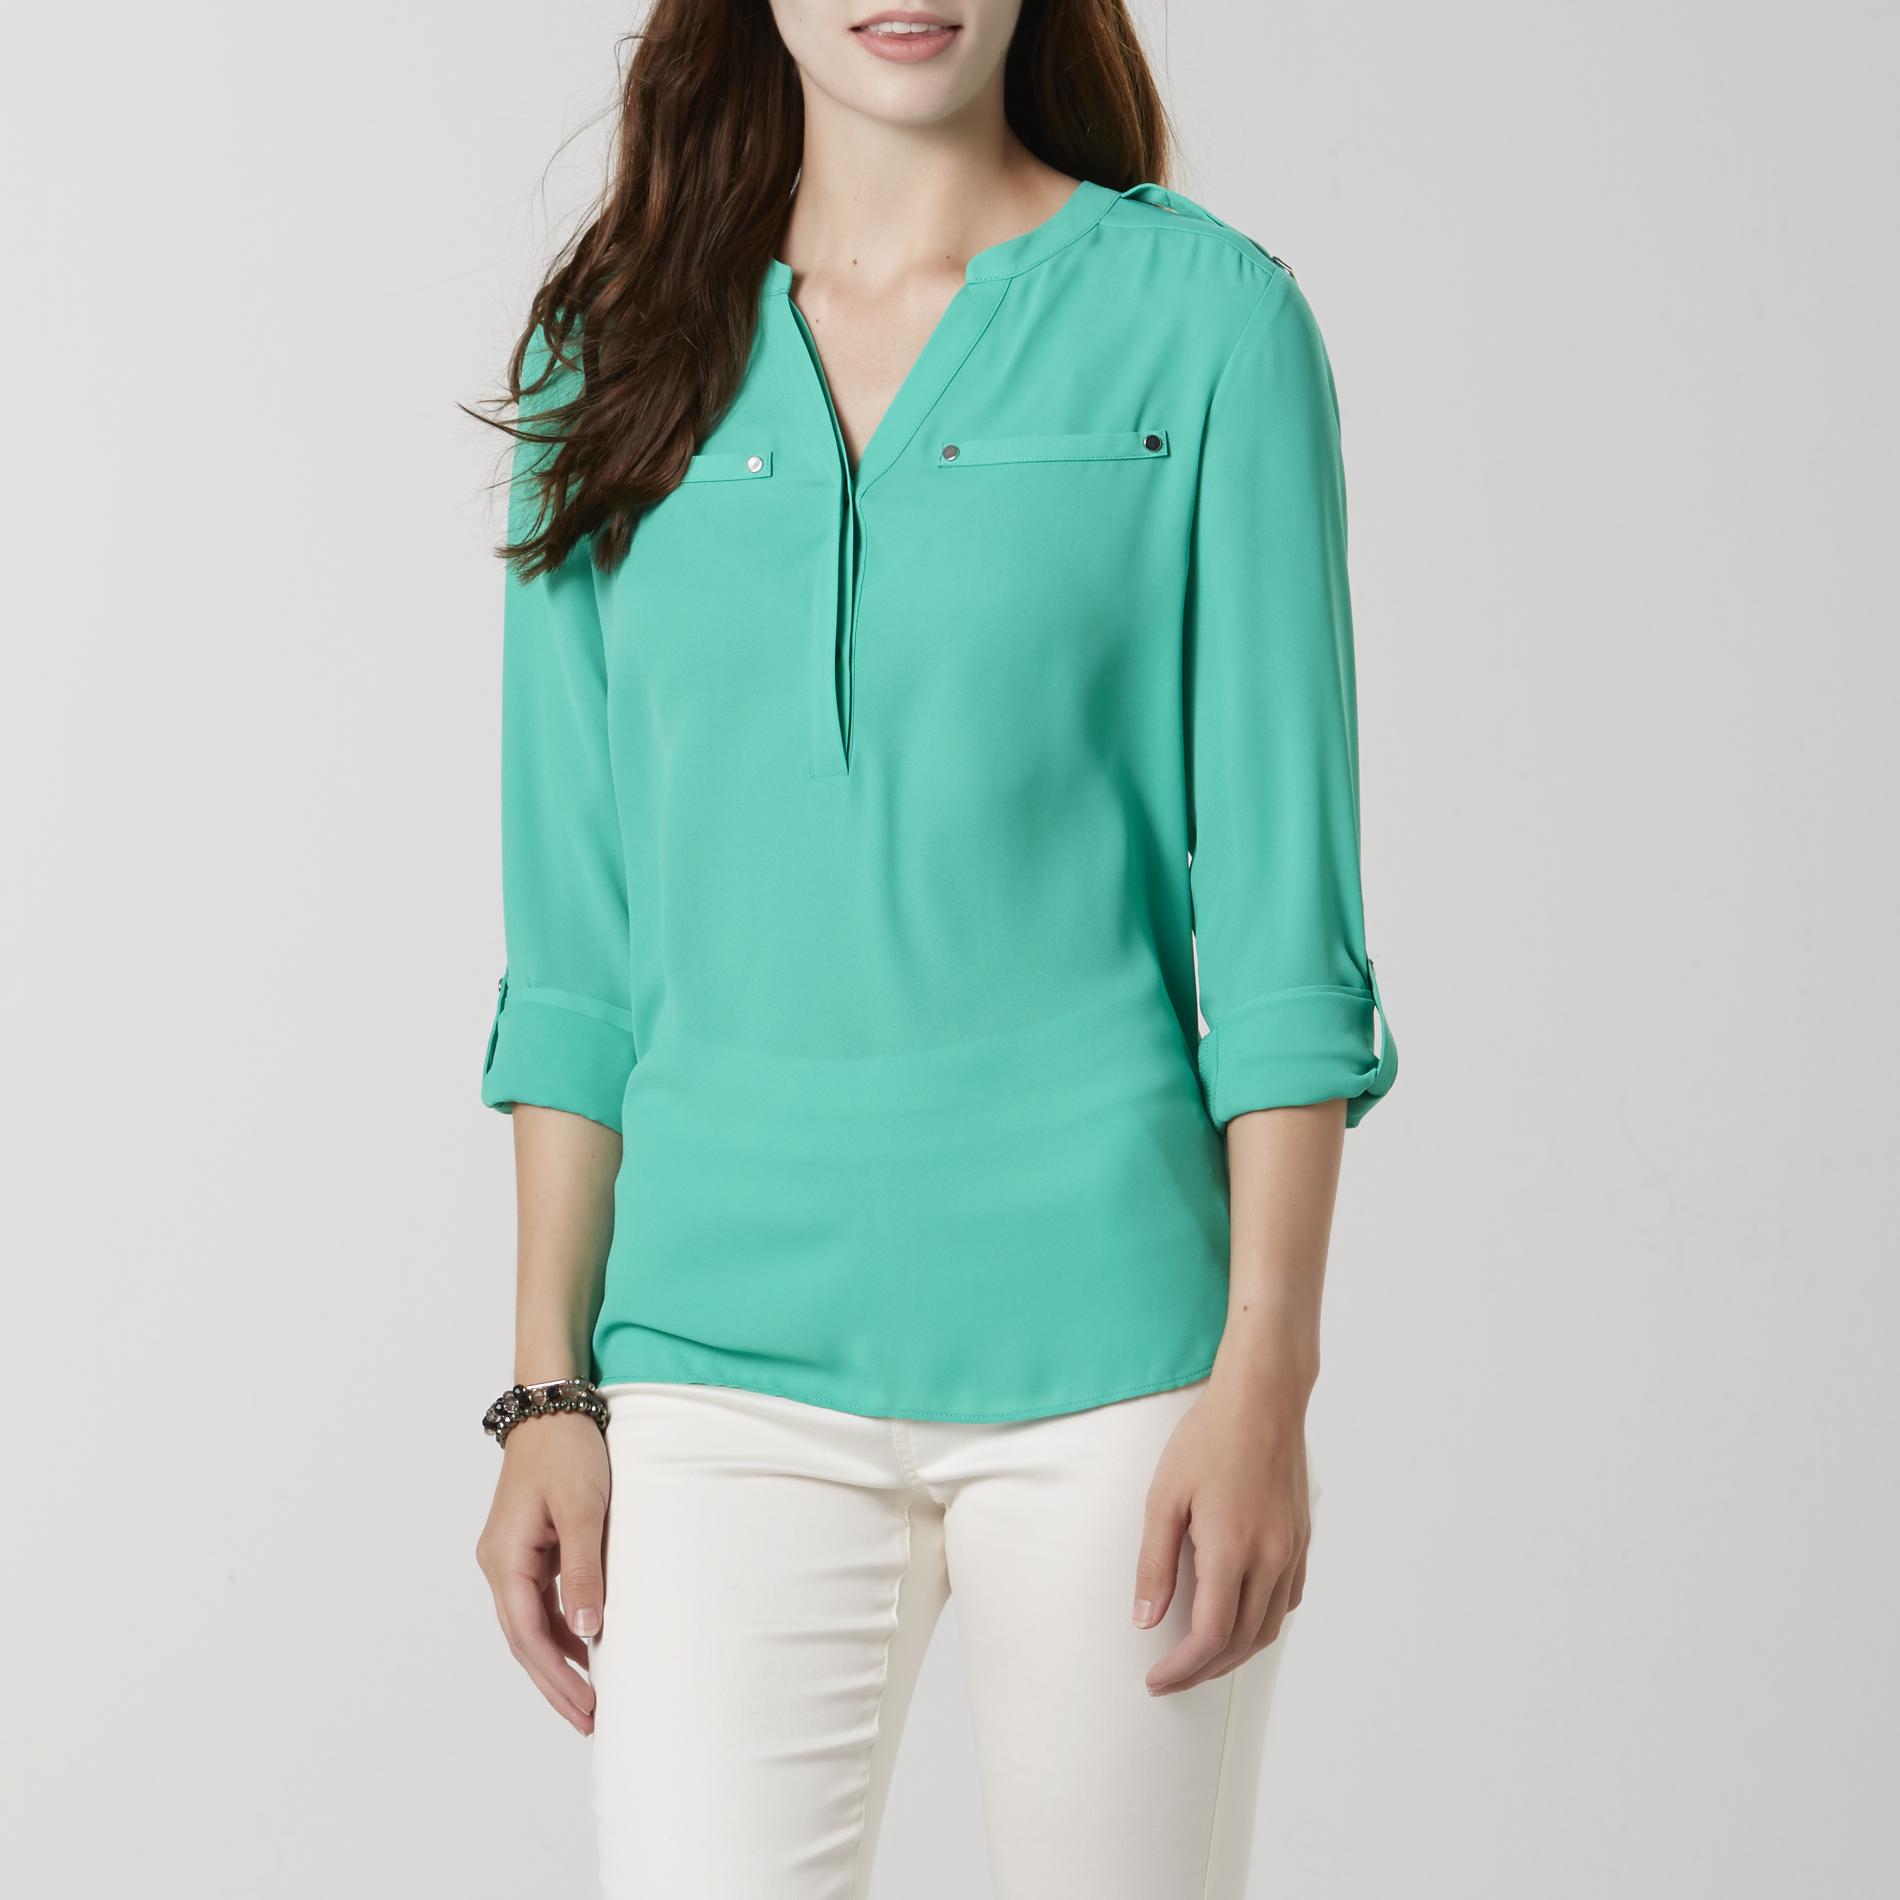 Attention Women's Utility Blouse